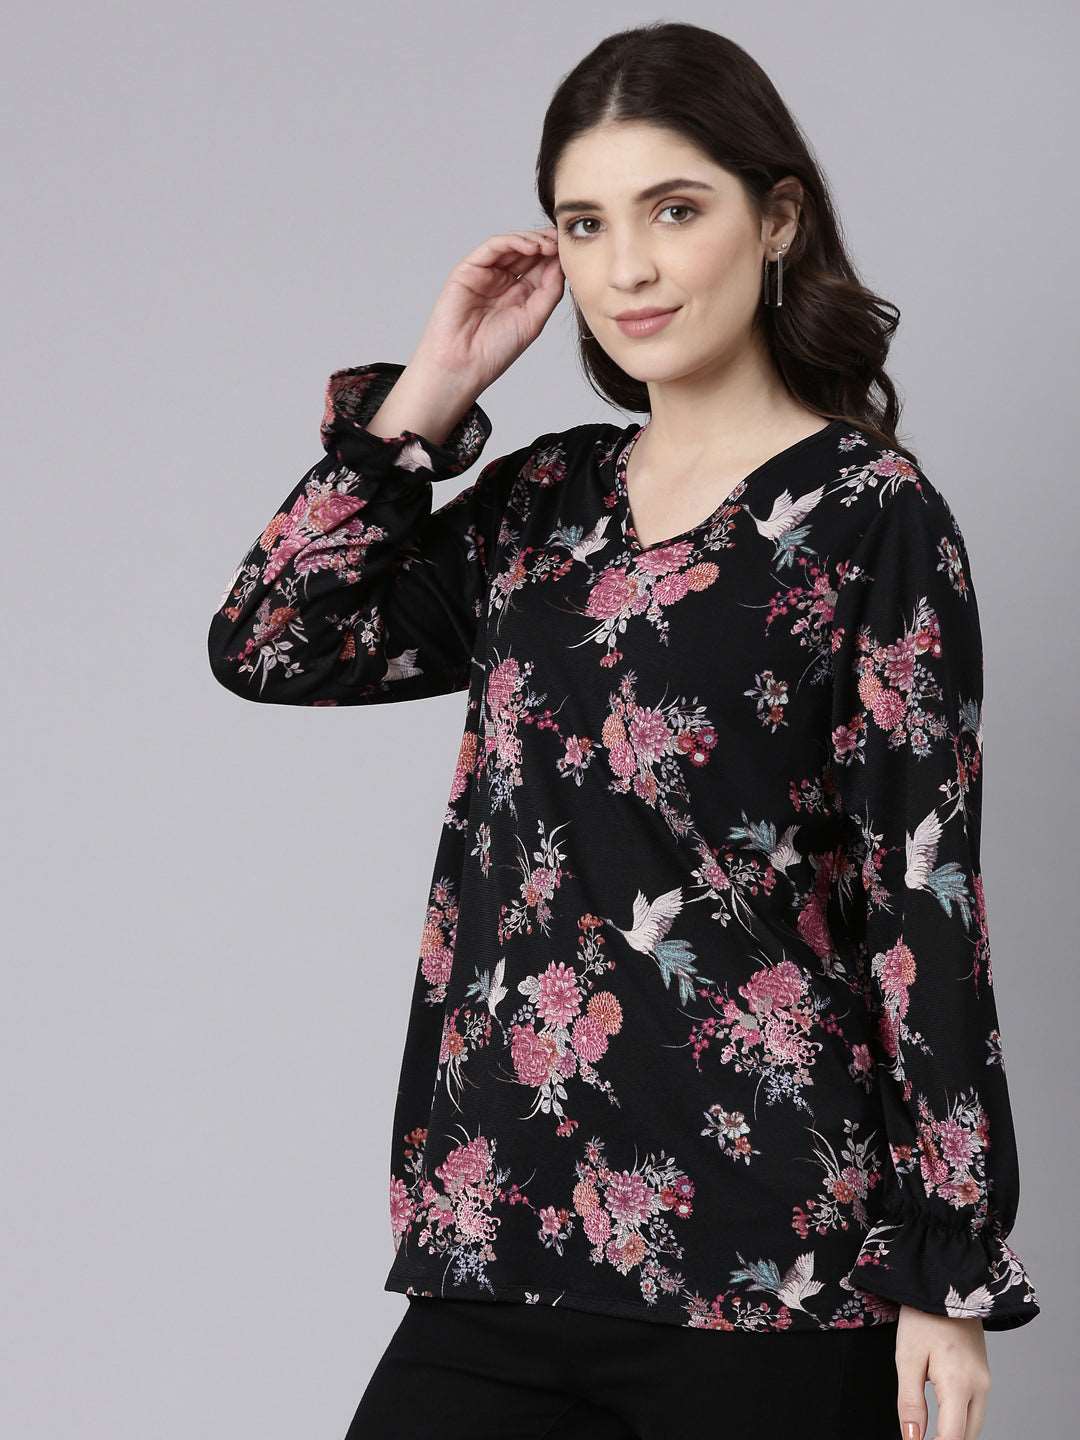 TheShaili Casual Floral Black Full Sleeves V Neck Top for Womens & Girls/Casual Top for Office College Work Casual Wear